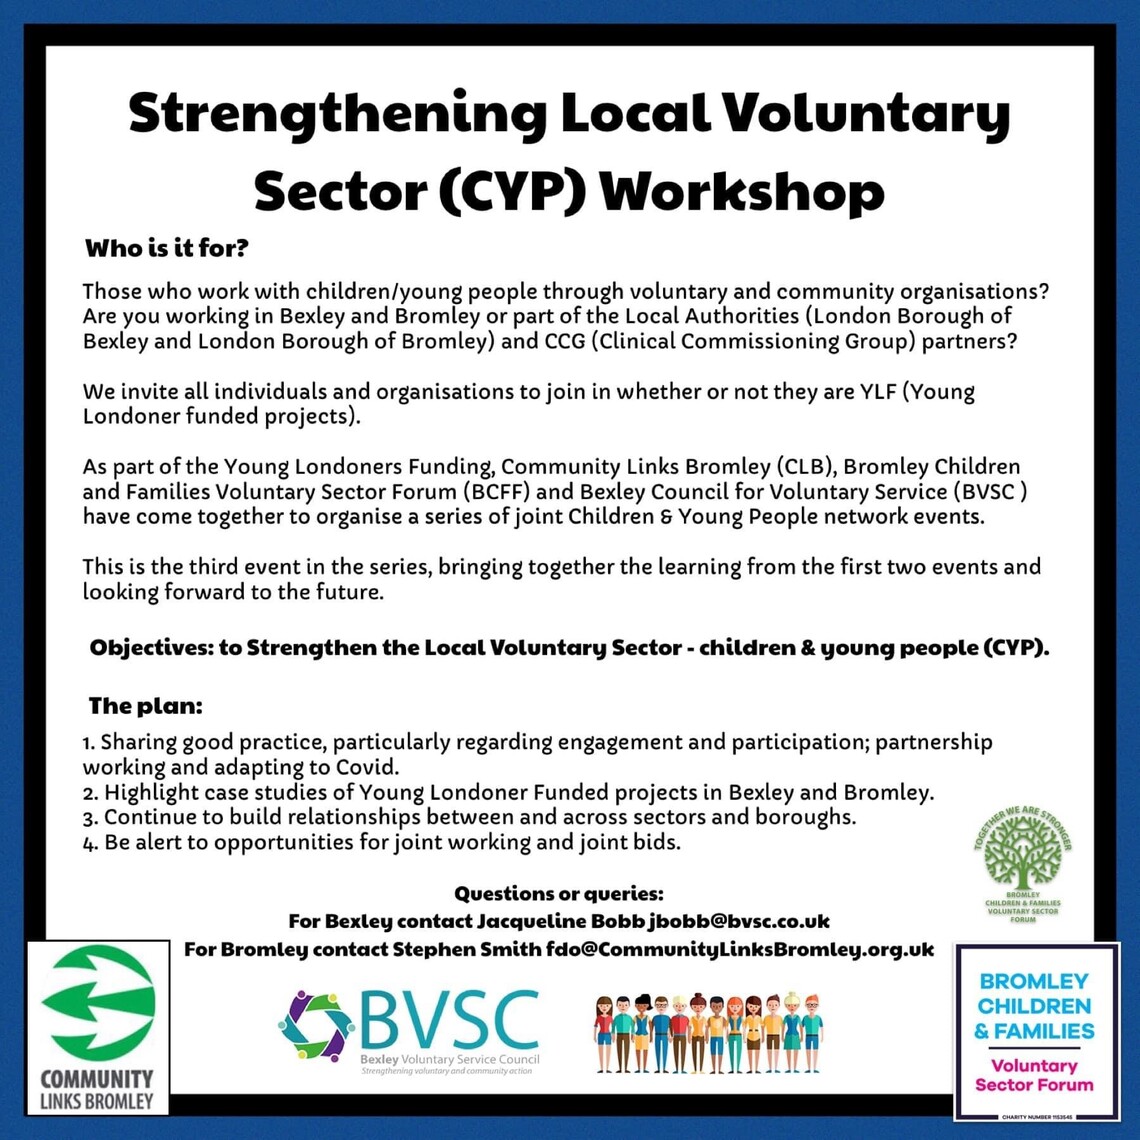 Strengthening Local Voluntary Sector (CYP) workshop event image